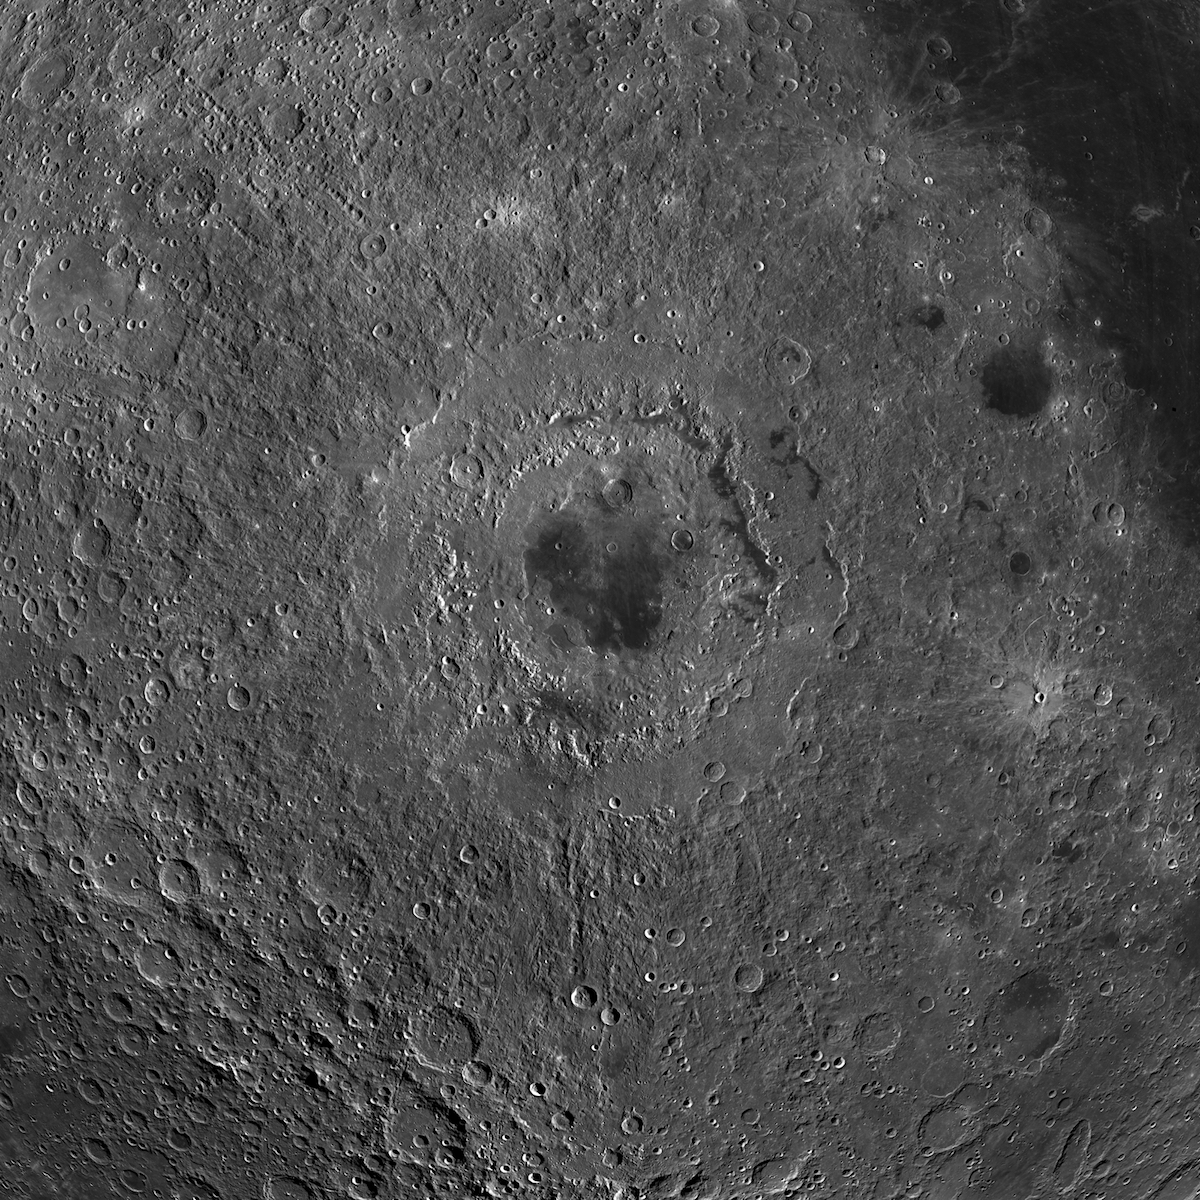 Detailed view of lunar surface with many craters. In the center, a large crater has a dark, patchy floor. 